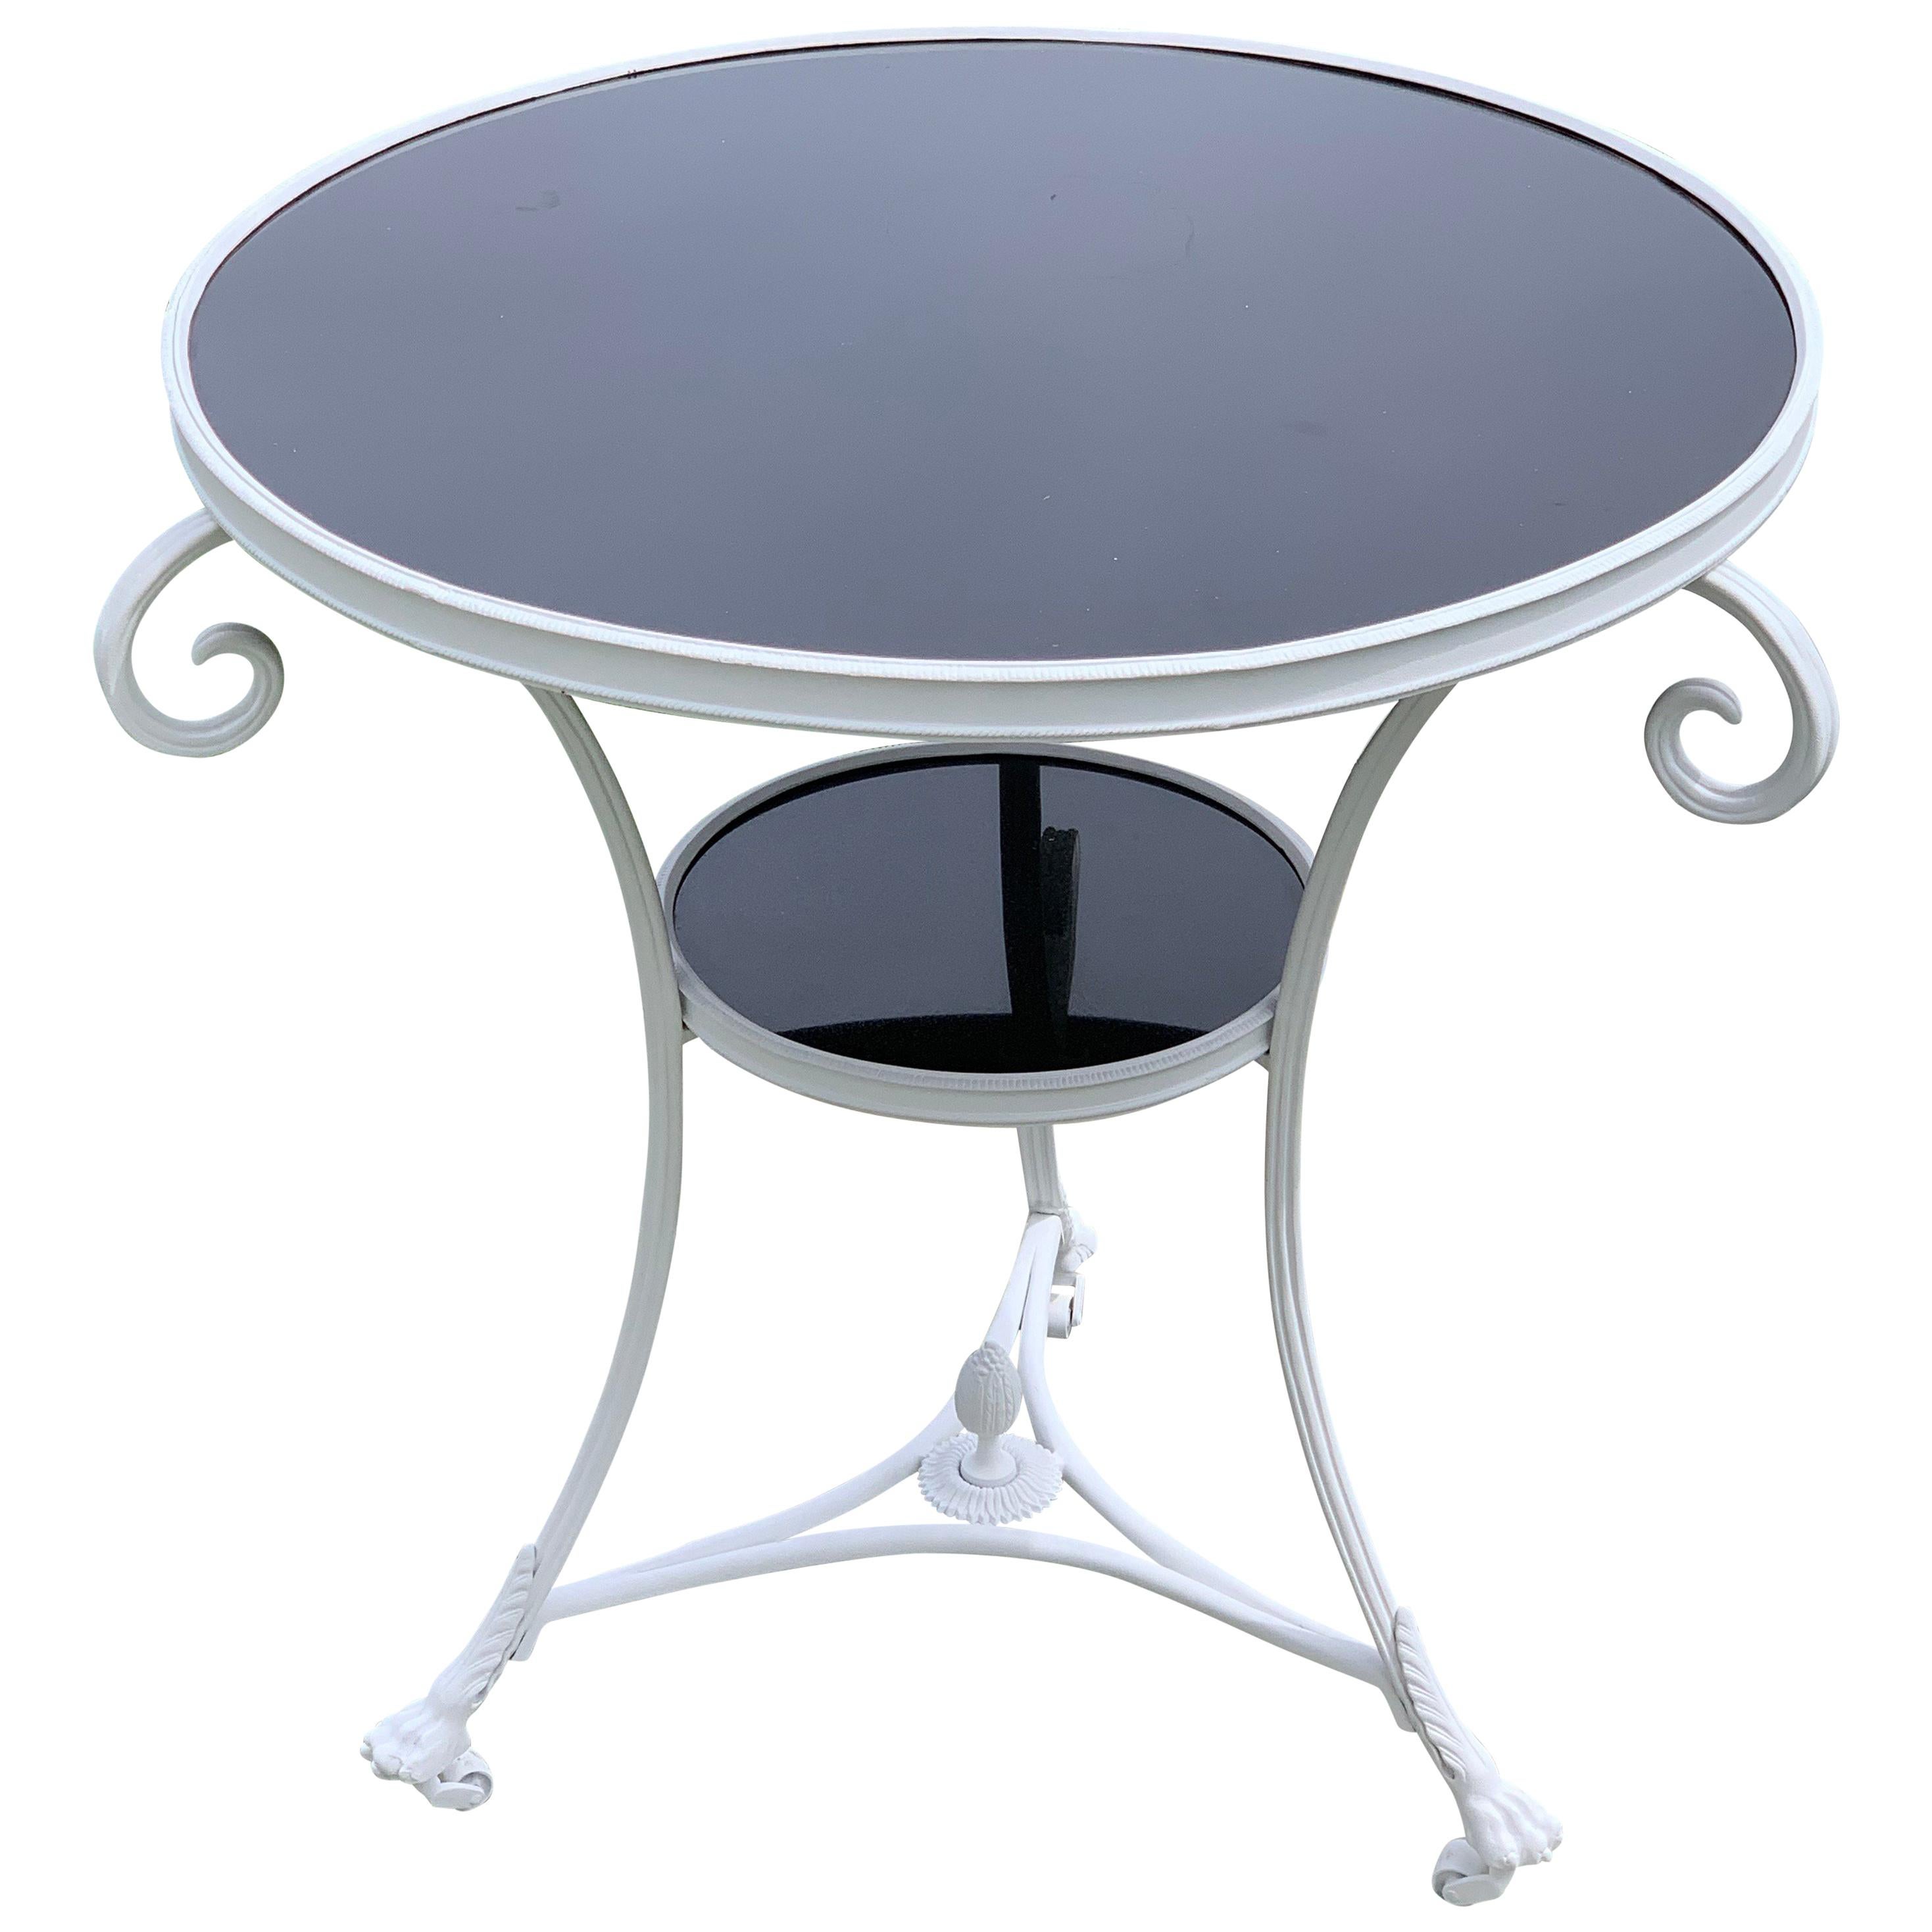 A Modern Black Marble Top Gueridon With a White Base 